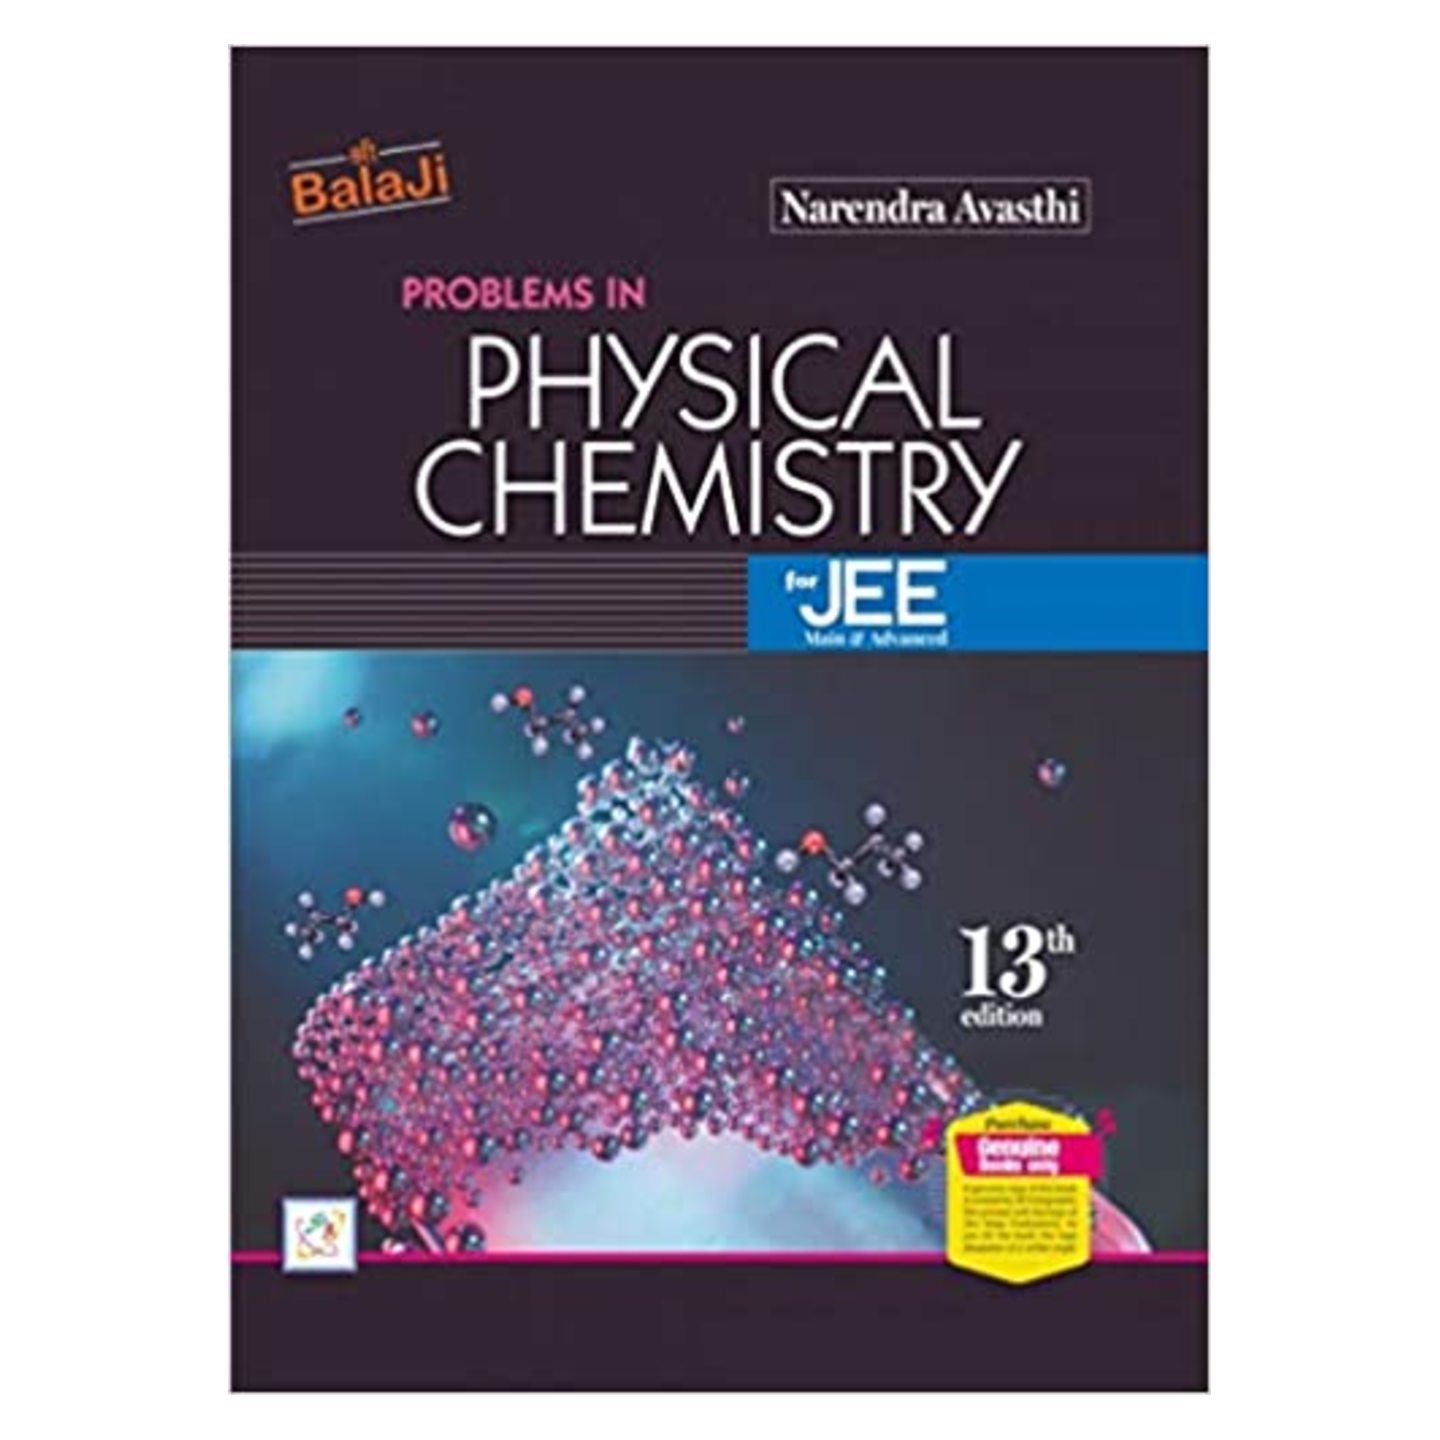 Physical Chemistry by Narendra Avasthi for Jee 2020-2021 Editio